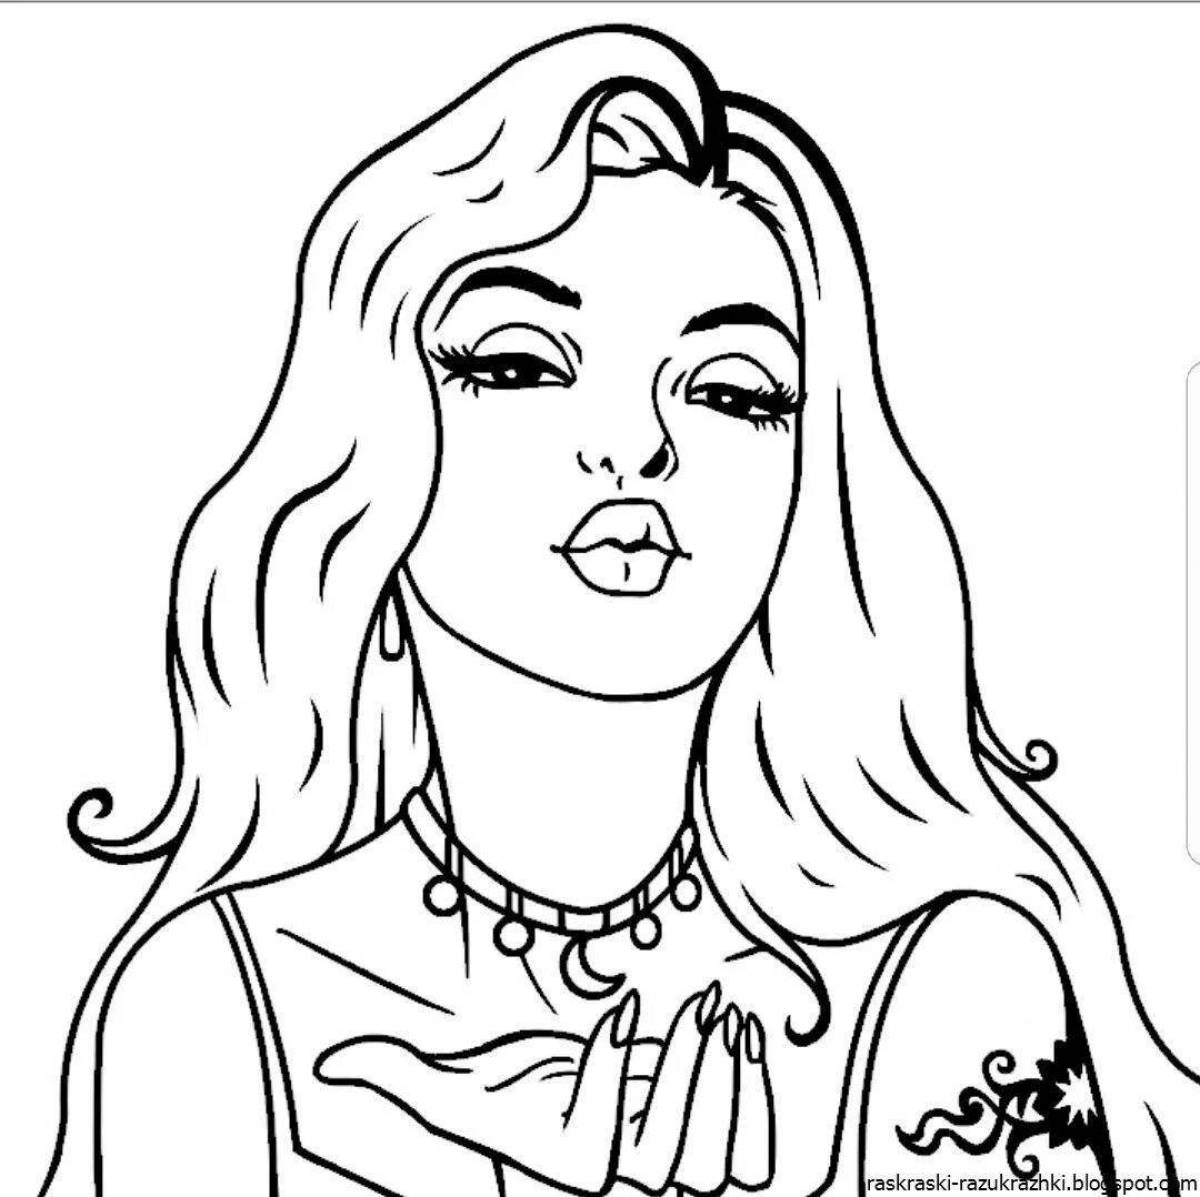 Coloring book for girls with bright makeup